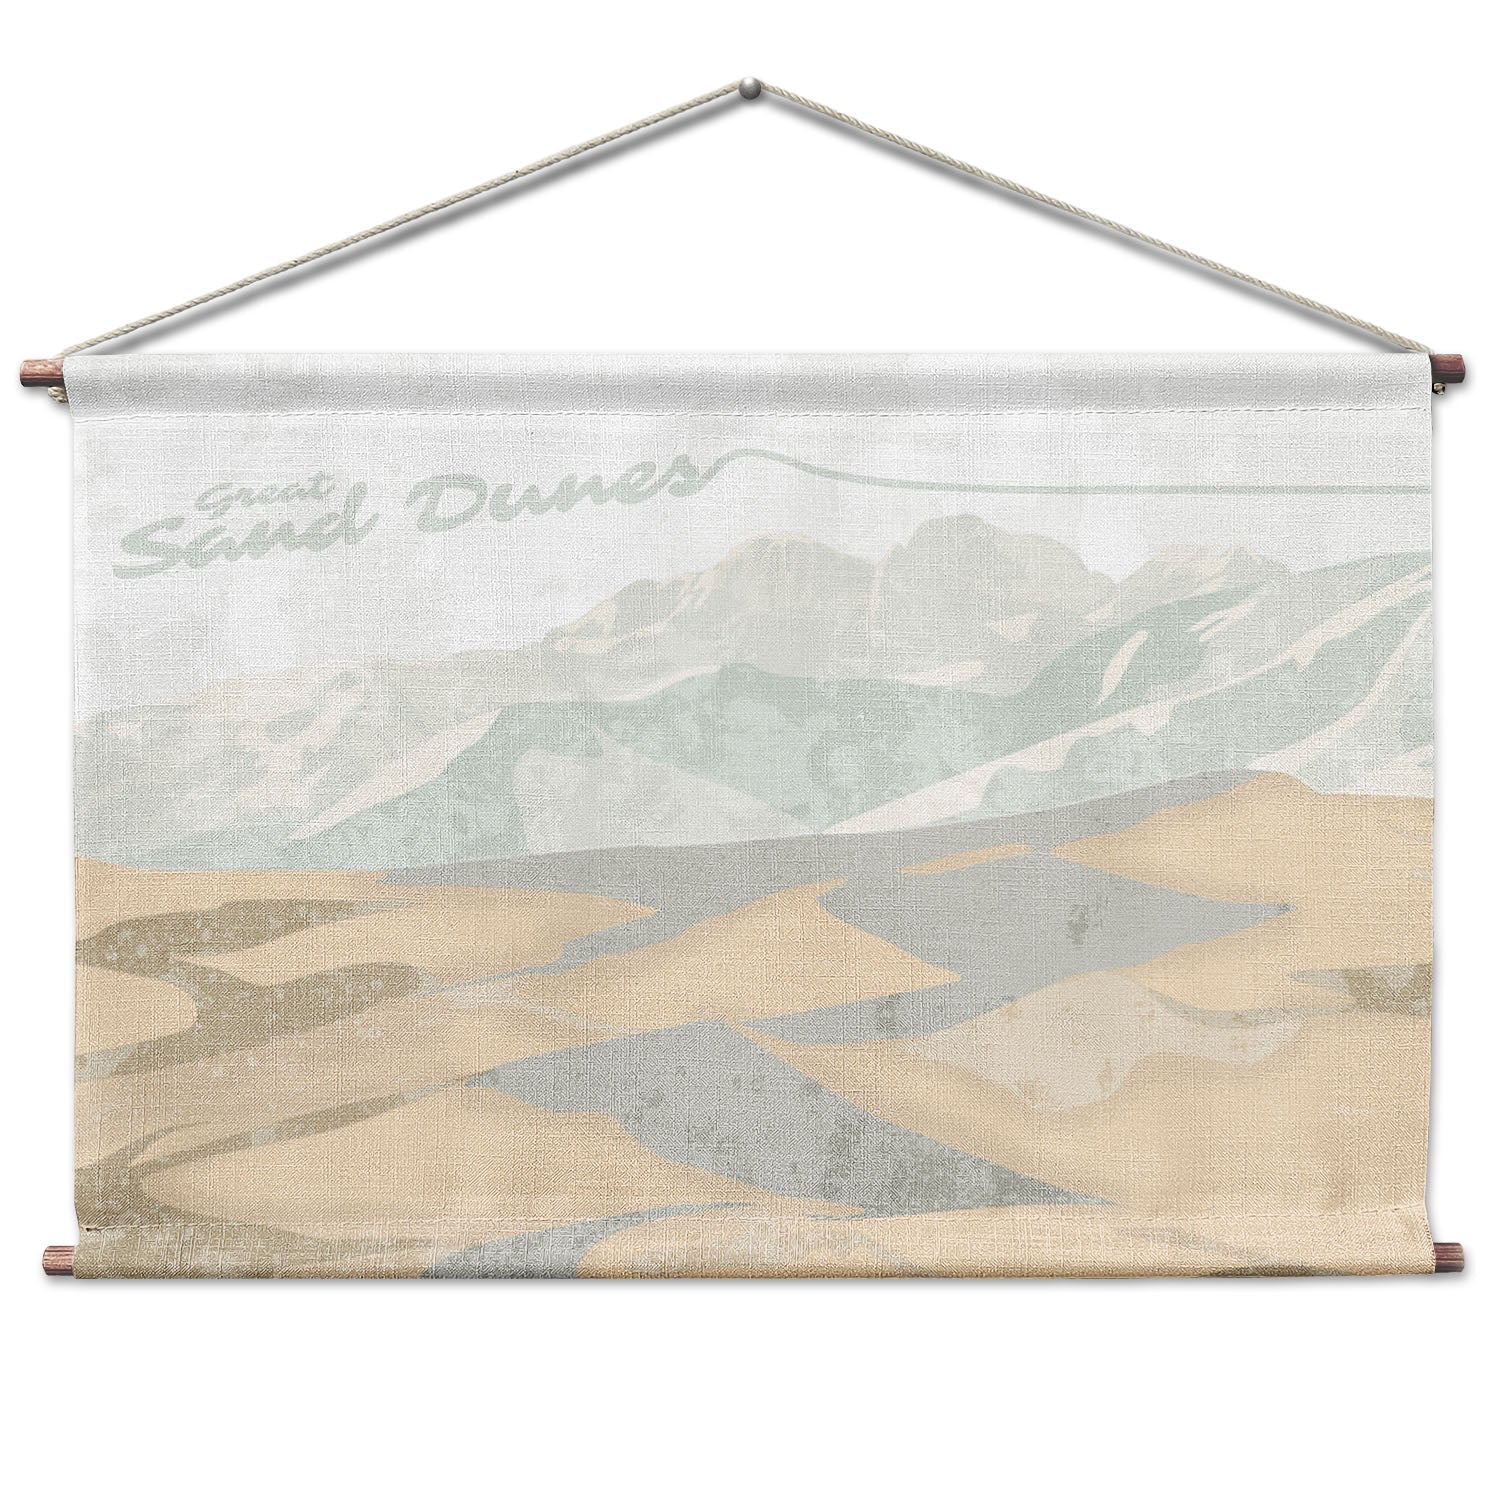 Great Sand Dunes Abstract Landscape Wall Hanging - Walnut -  - Knotty Tie Co.